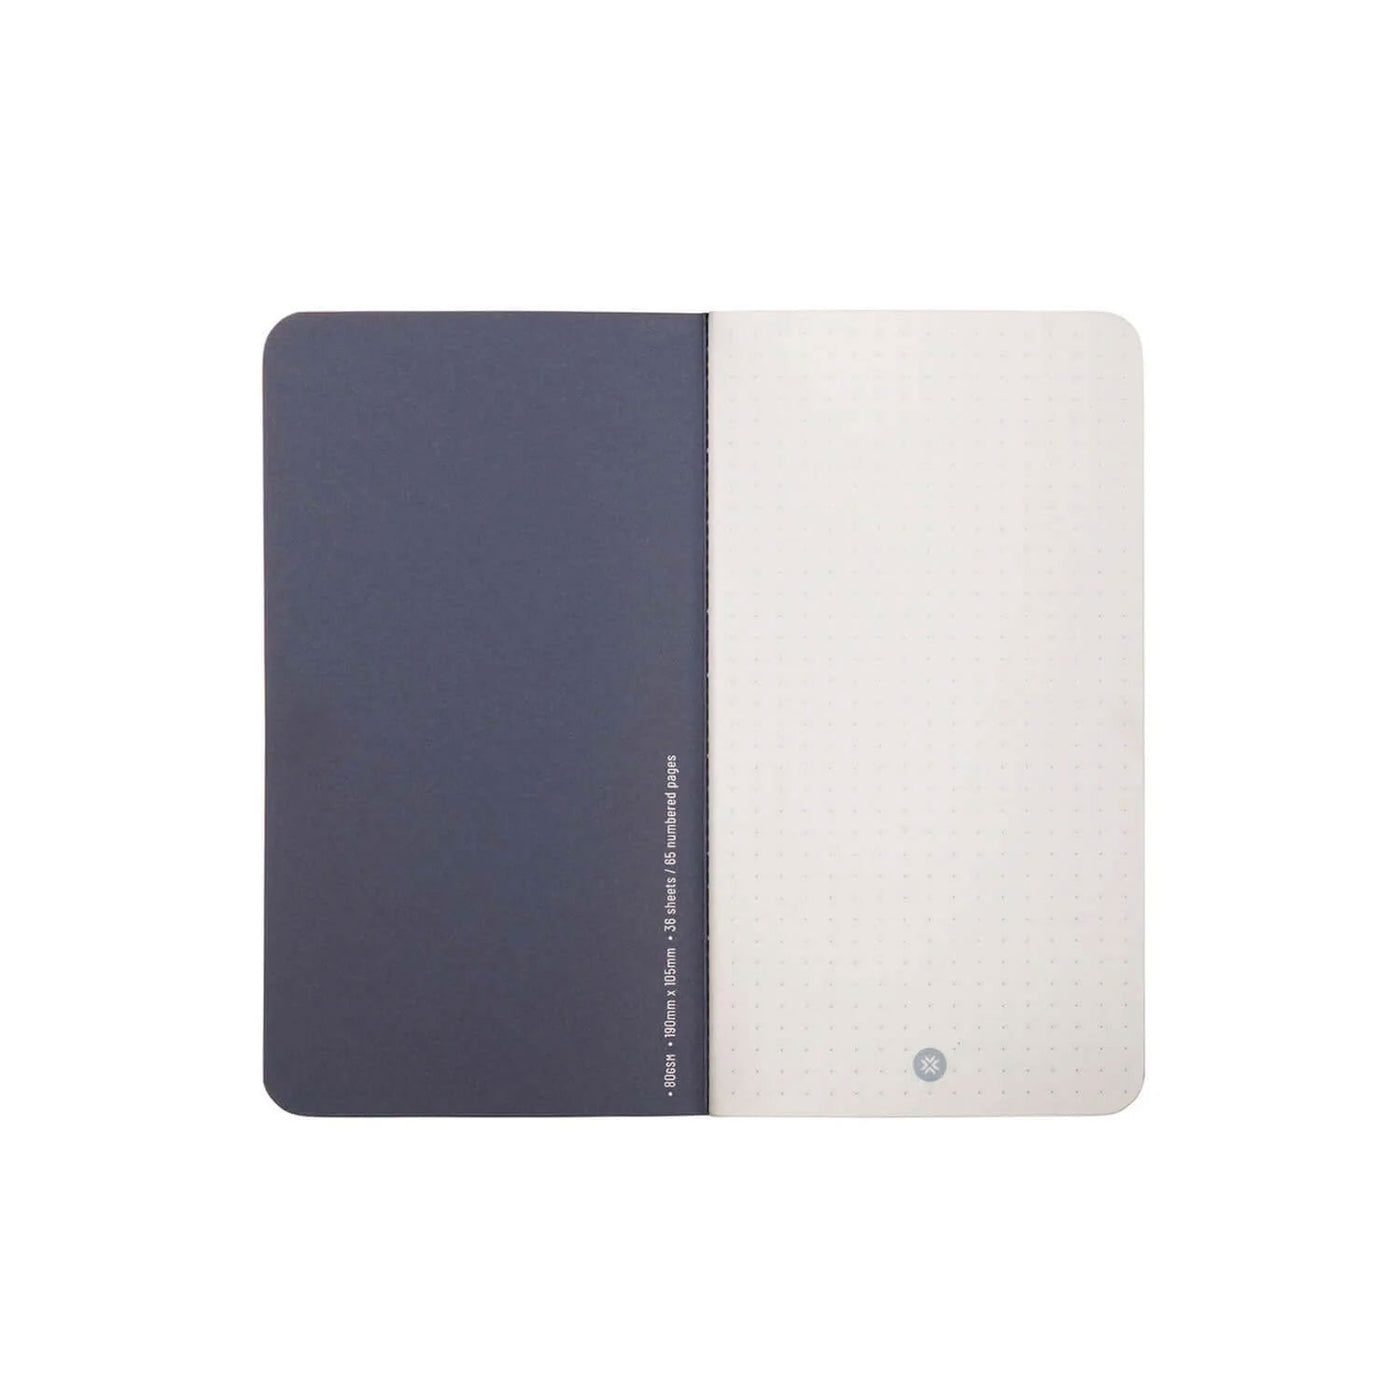 Pennline Quikfill Notebook Refill For Quikrite, Blue - Set Of 2 3